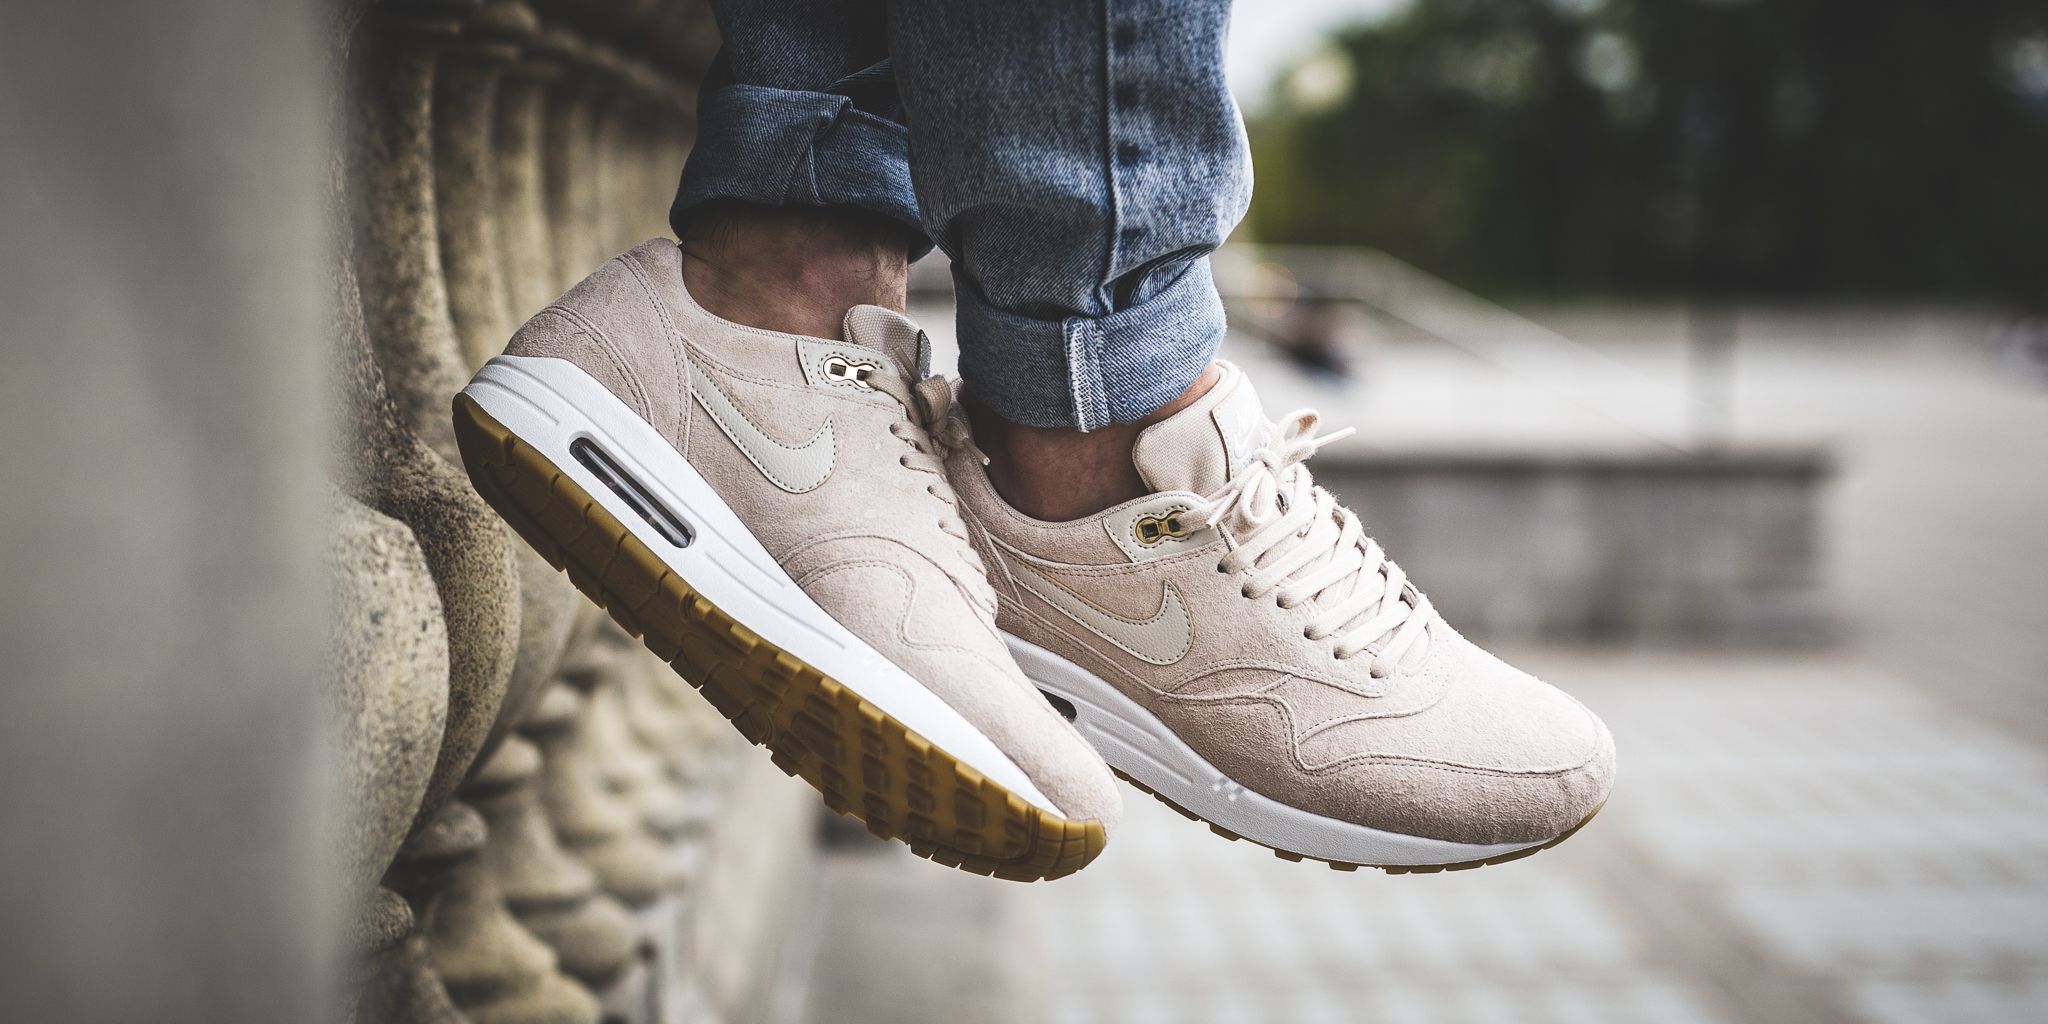 Supervisar Naufragio busto Titolo on Twitter: "NEW IN! Nike Wmns Air Max 1 Sd -  Oatmeal/Oatmeal-White-Gum Light Brown SHOP HERE: https://t.co/79usoNaTHF  https://t.co/ugX6AfOrD9" / Twitter